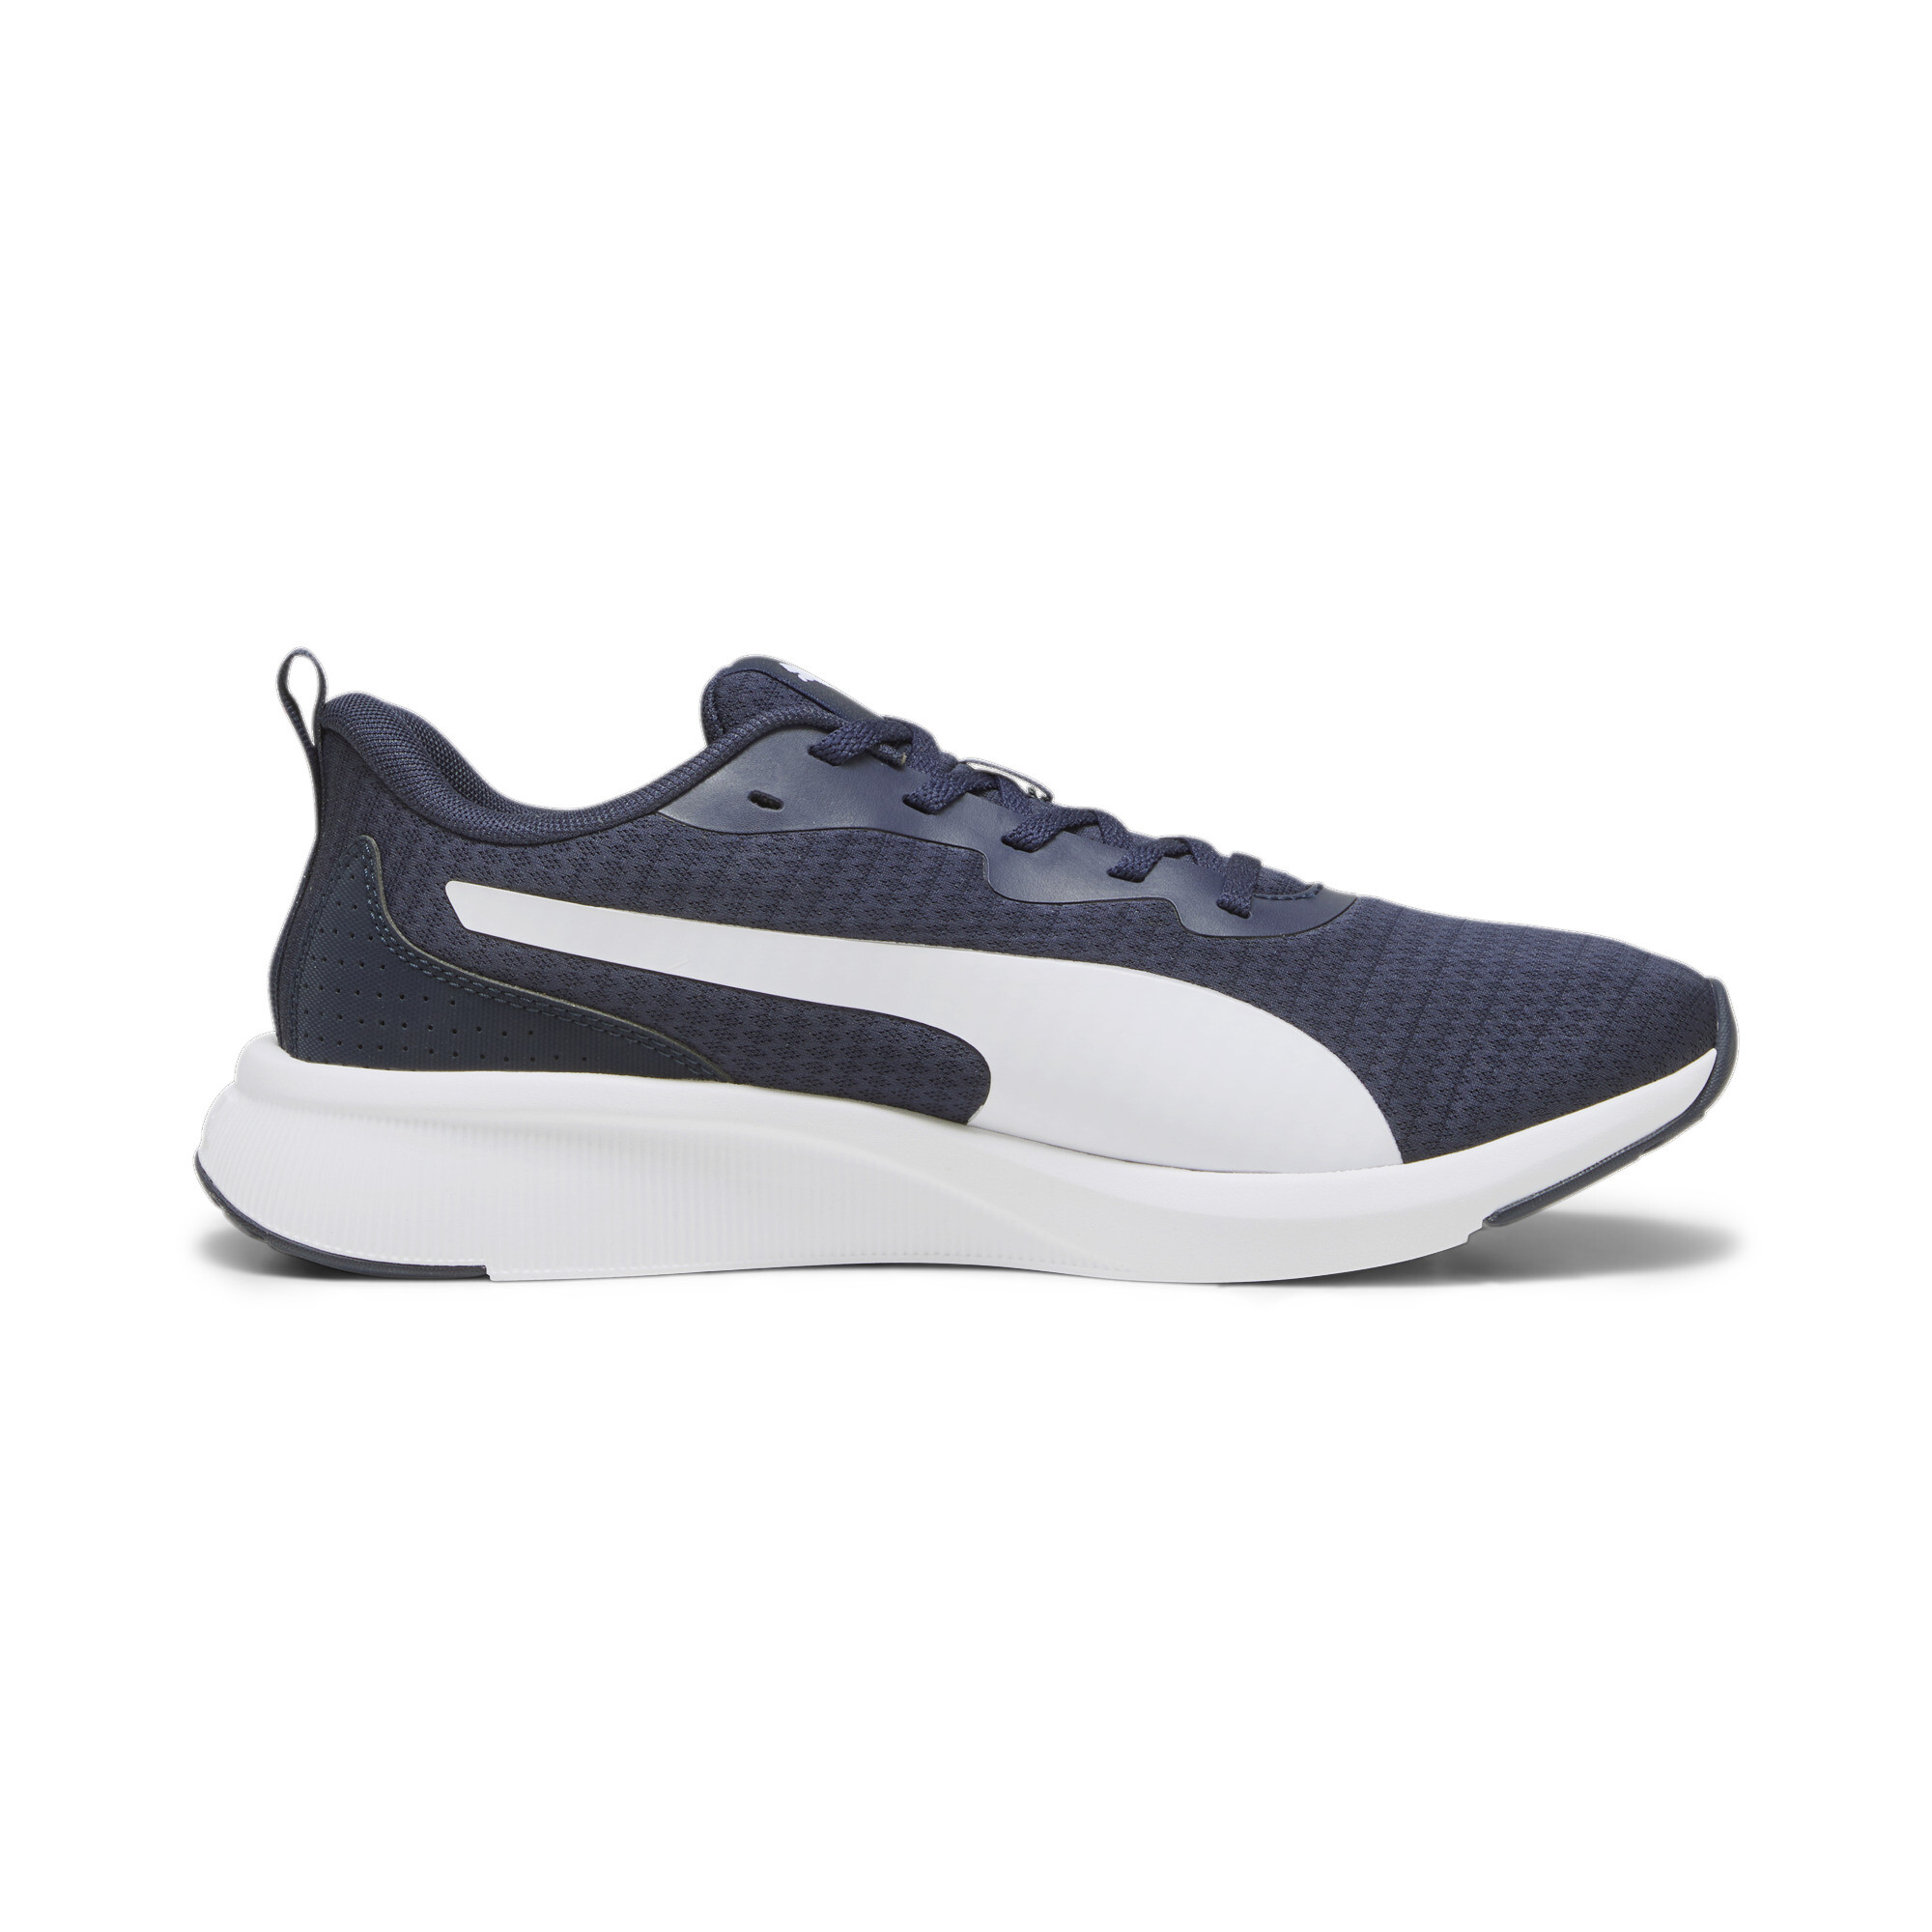 Puma Flyer Lite Running Shoes, Blue, Size 42, Shoes